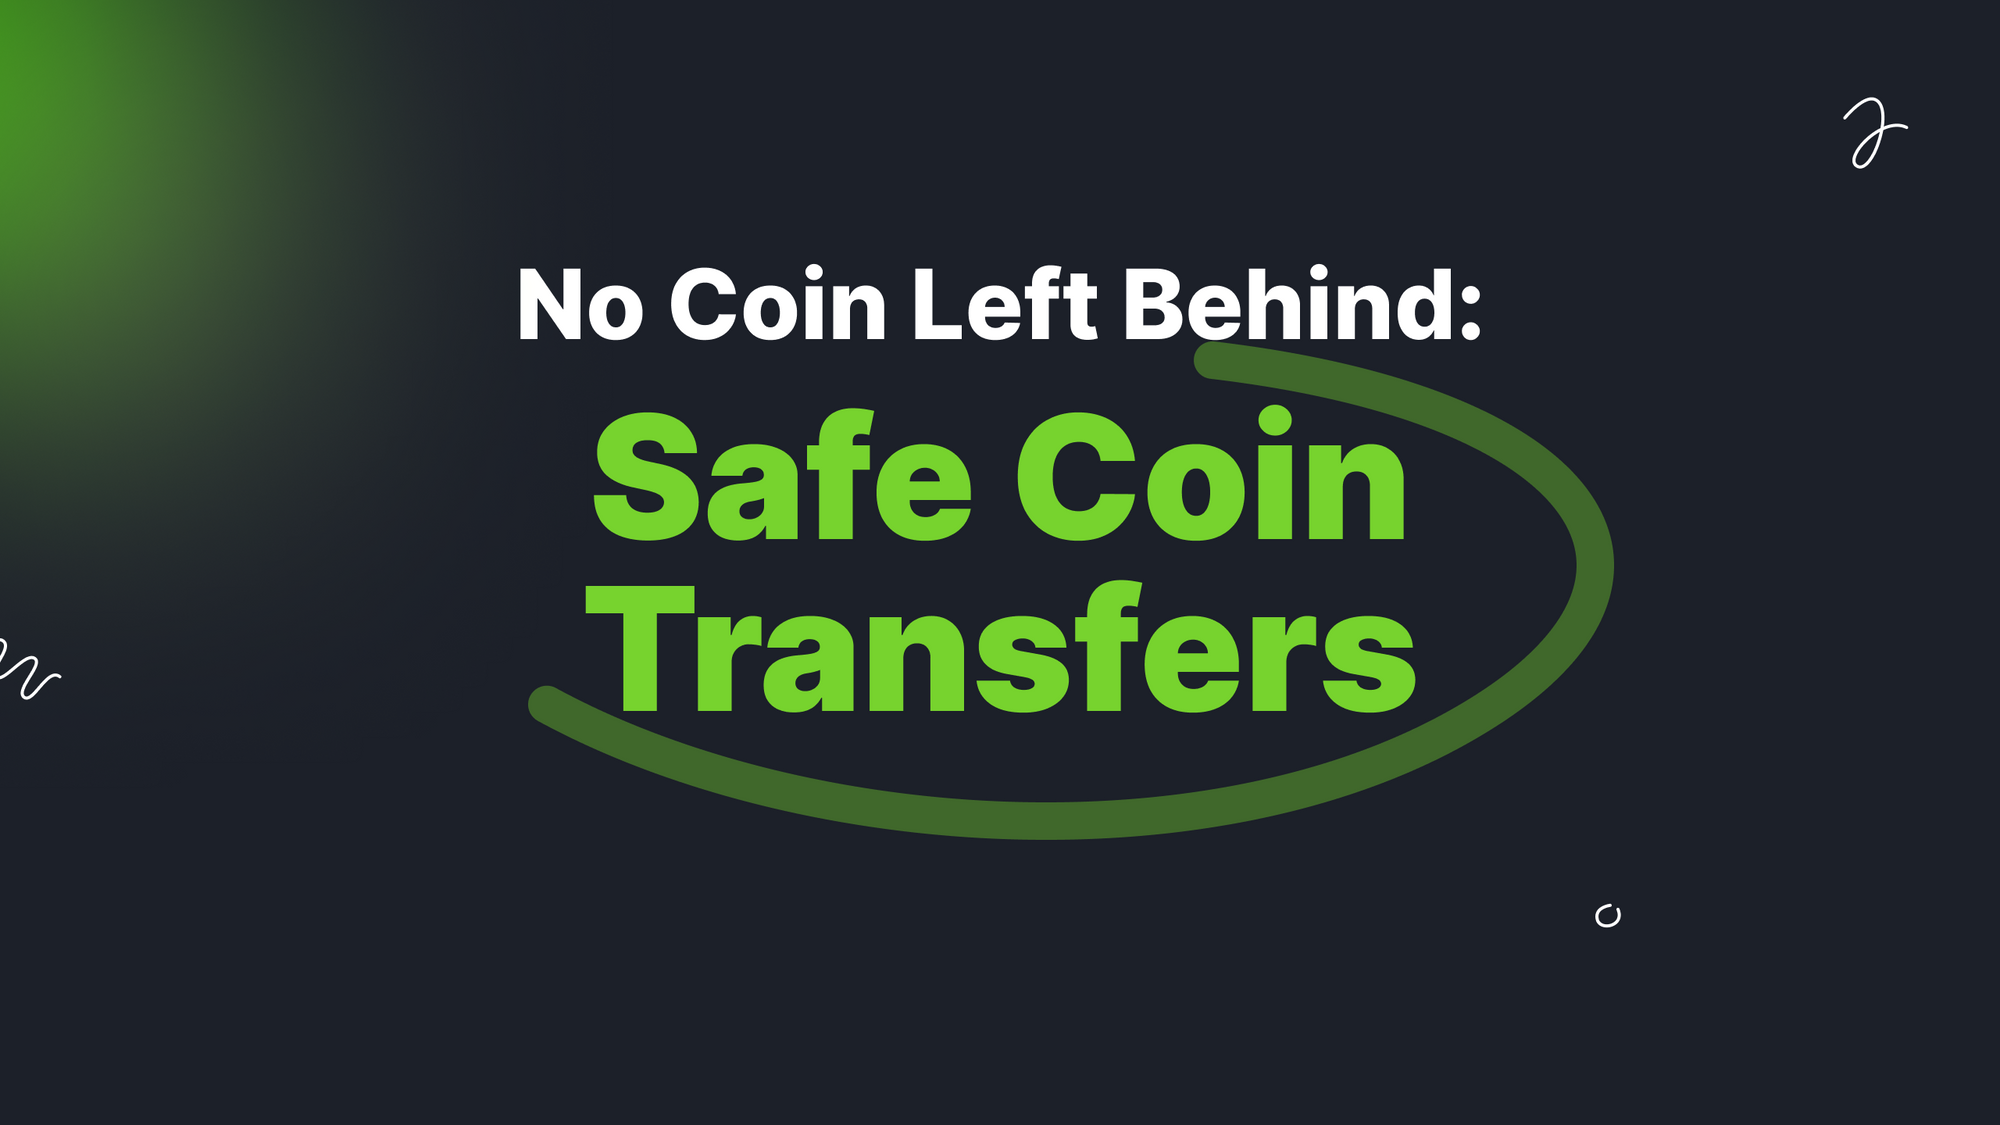 Smart Tips on Sending and Receiving Coins Safely